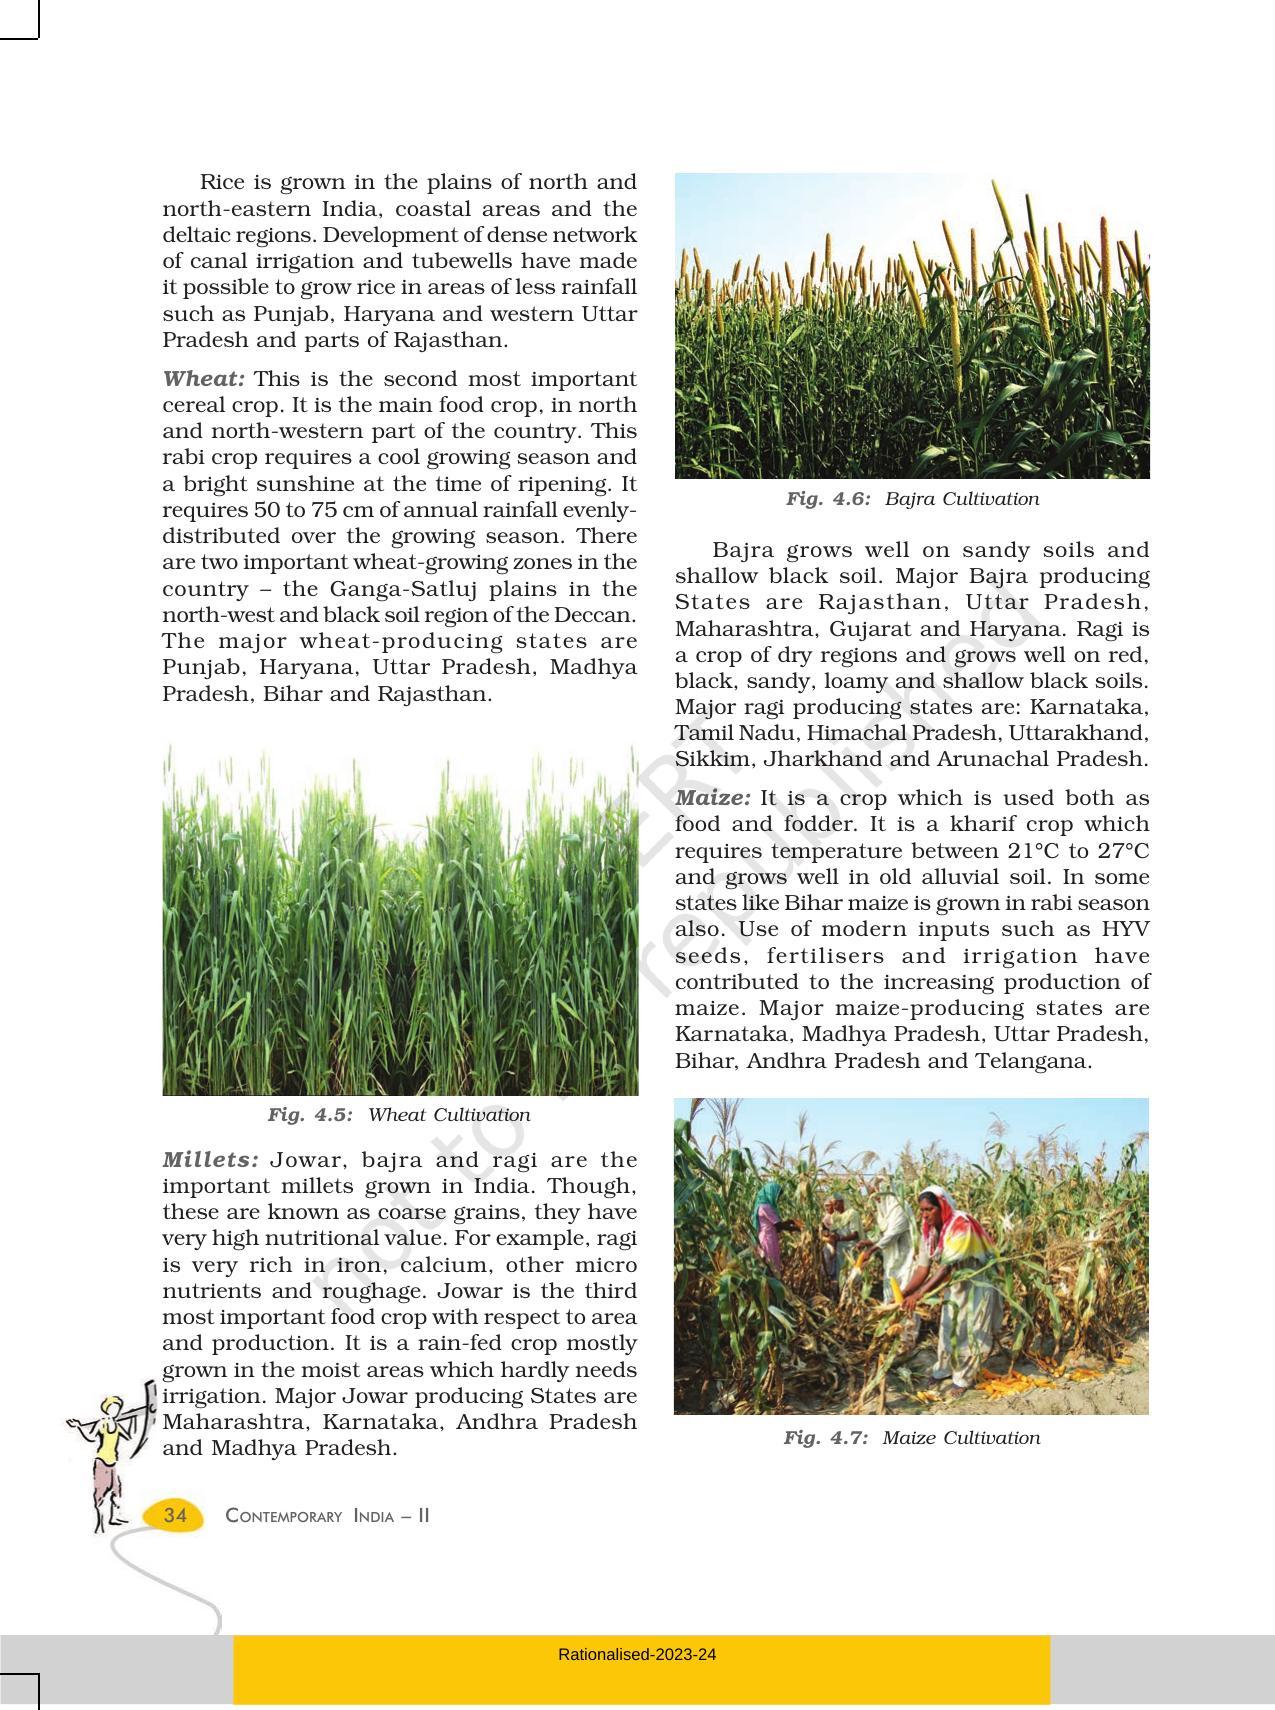 NCERT Book for Class 10 Geography Chapter 4 Agriculture - Page 5